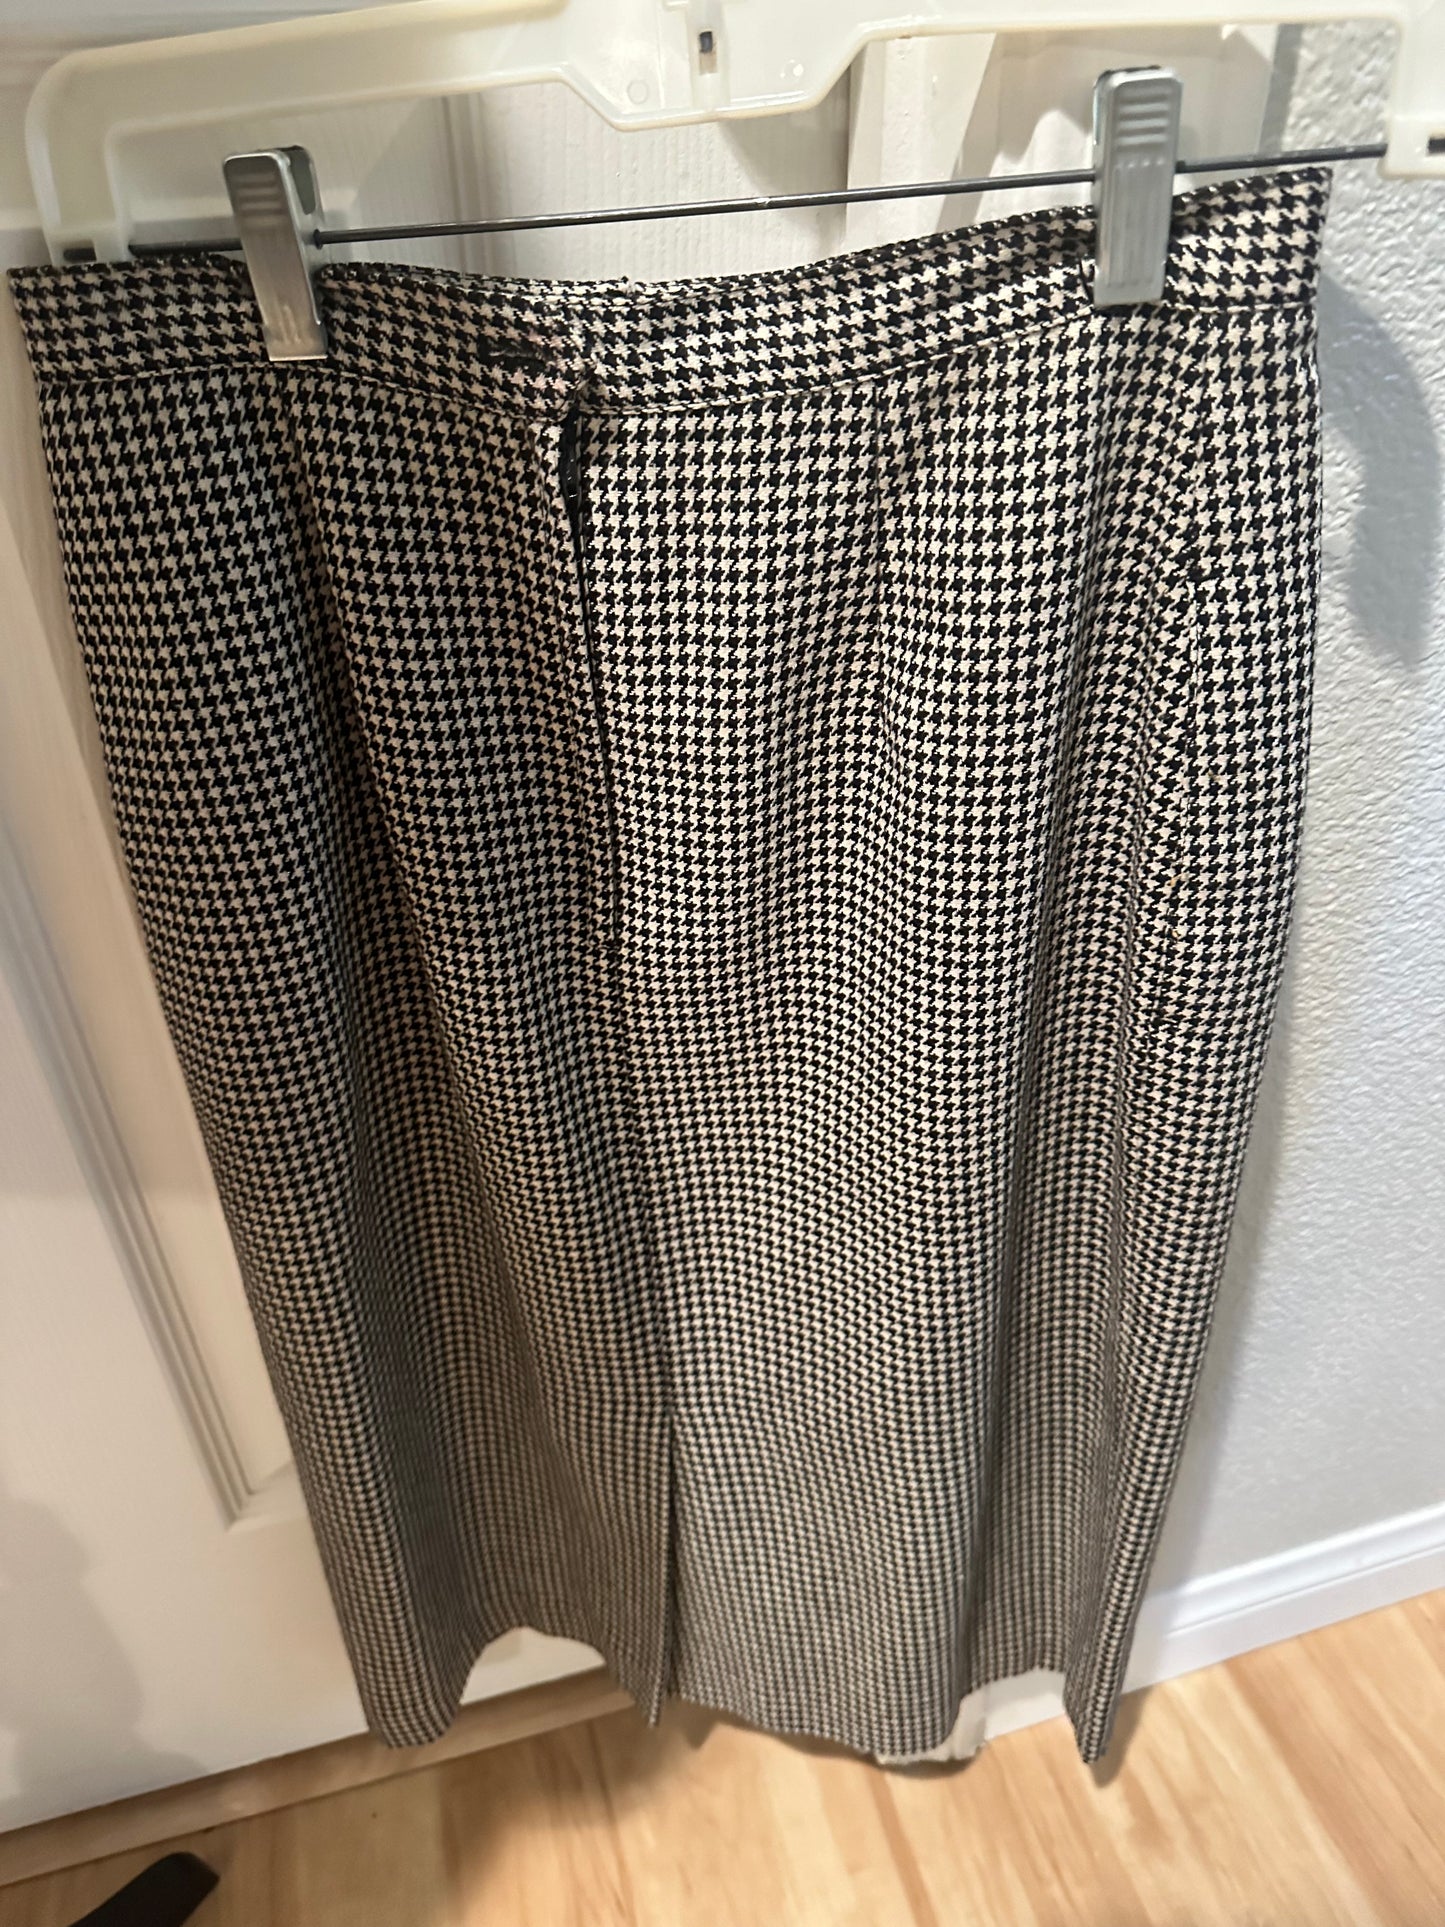 Two-Piece Houndstooth Print Kasper for ASL Jacket and Skirt, US Size 6